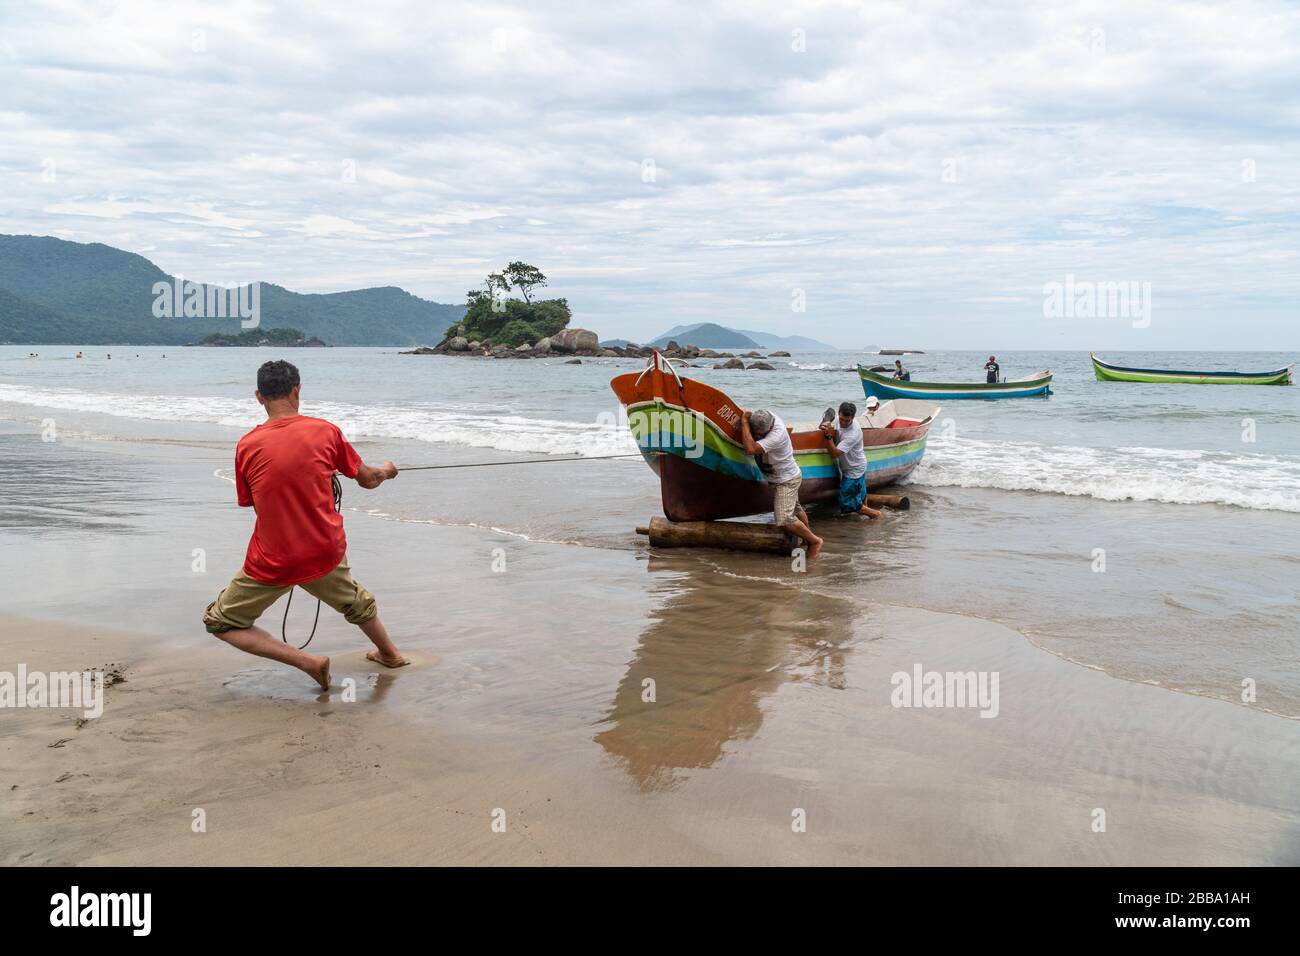 Caiçara fishermen pulling a wooden canoe out of the water, in Ilhabela, Brazil. Stock Photo